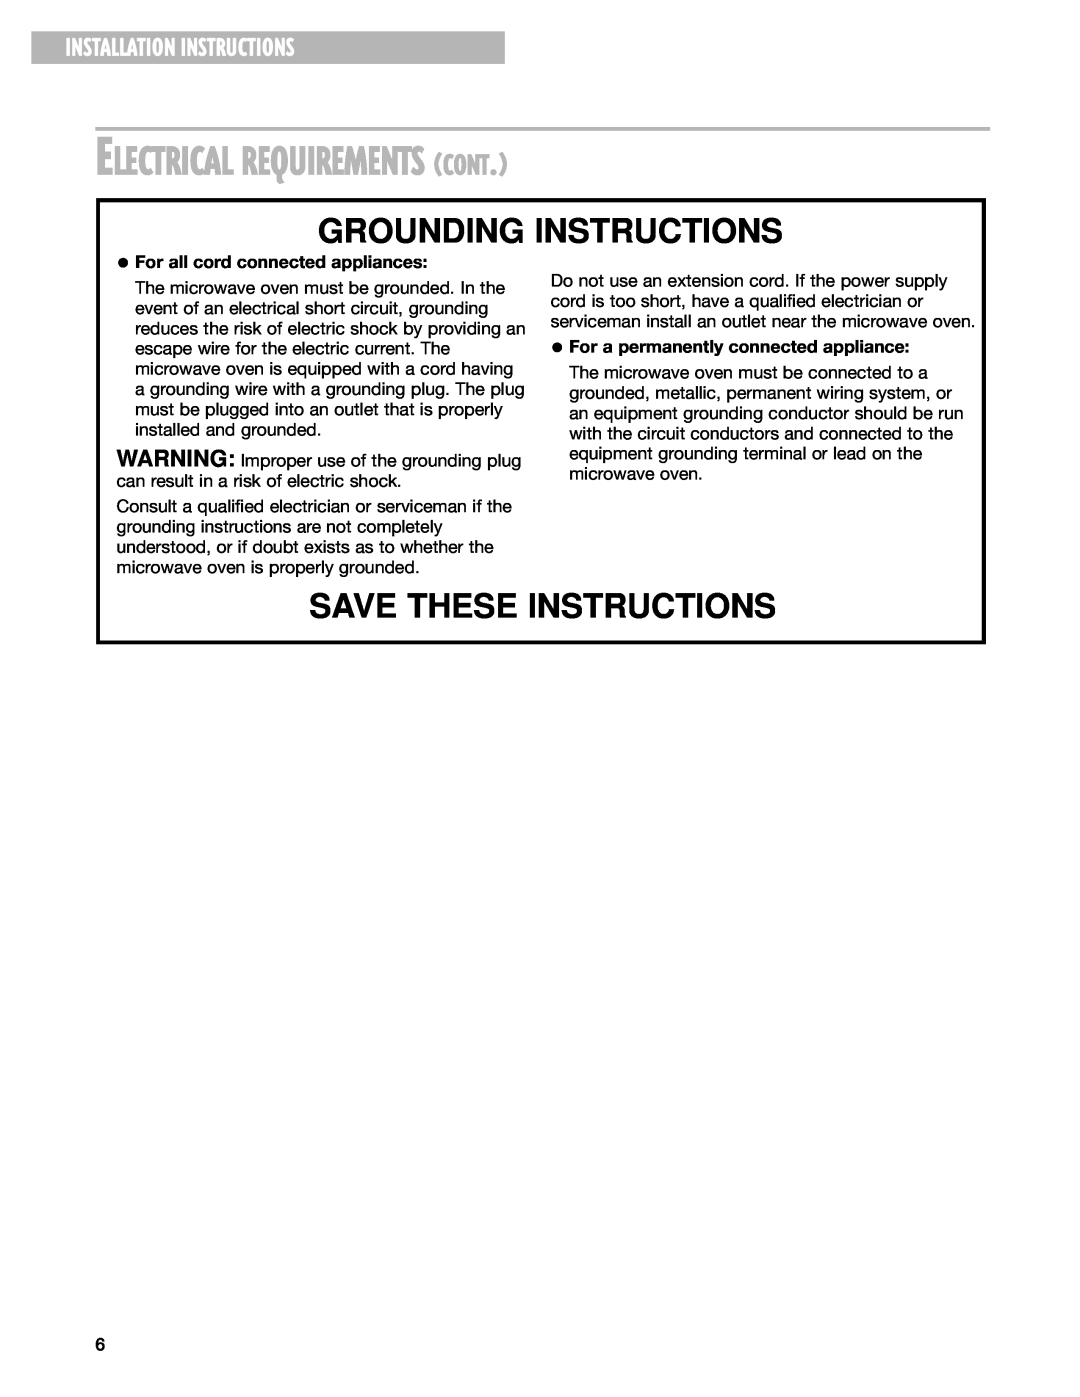 Whirlpool pmn Electrical Requirements Cont, Grounding Instructions, Installation Instructions, Save These Instructions 